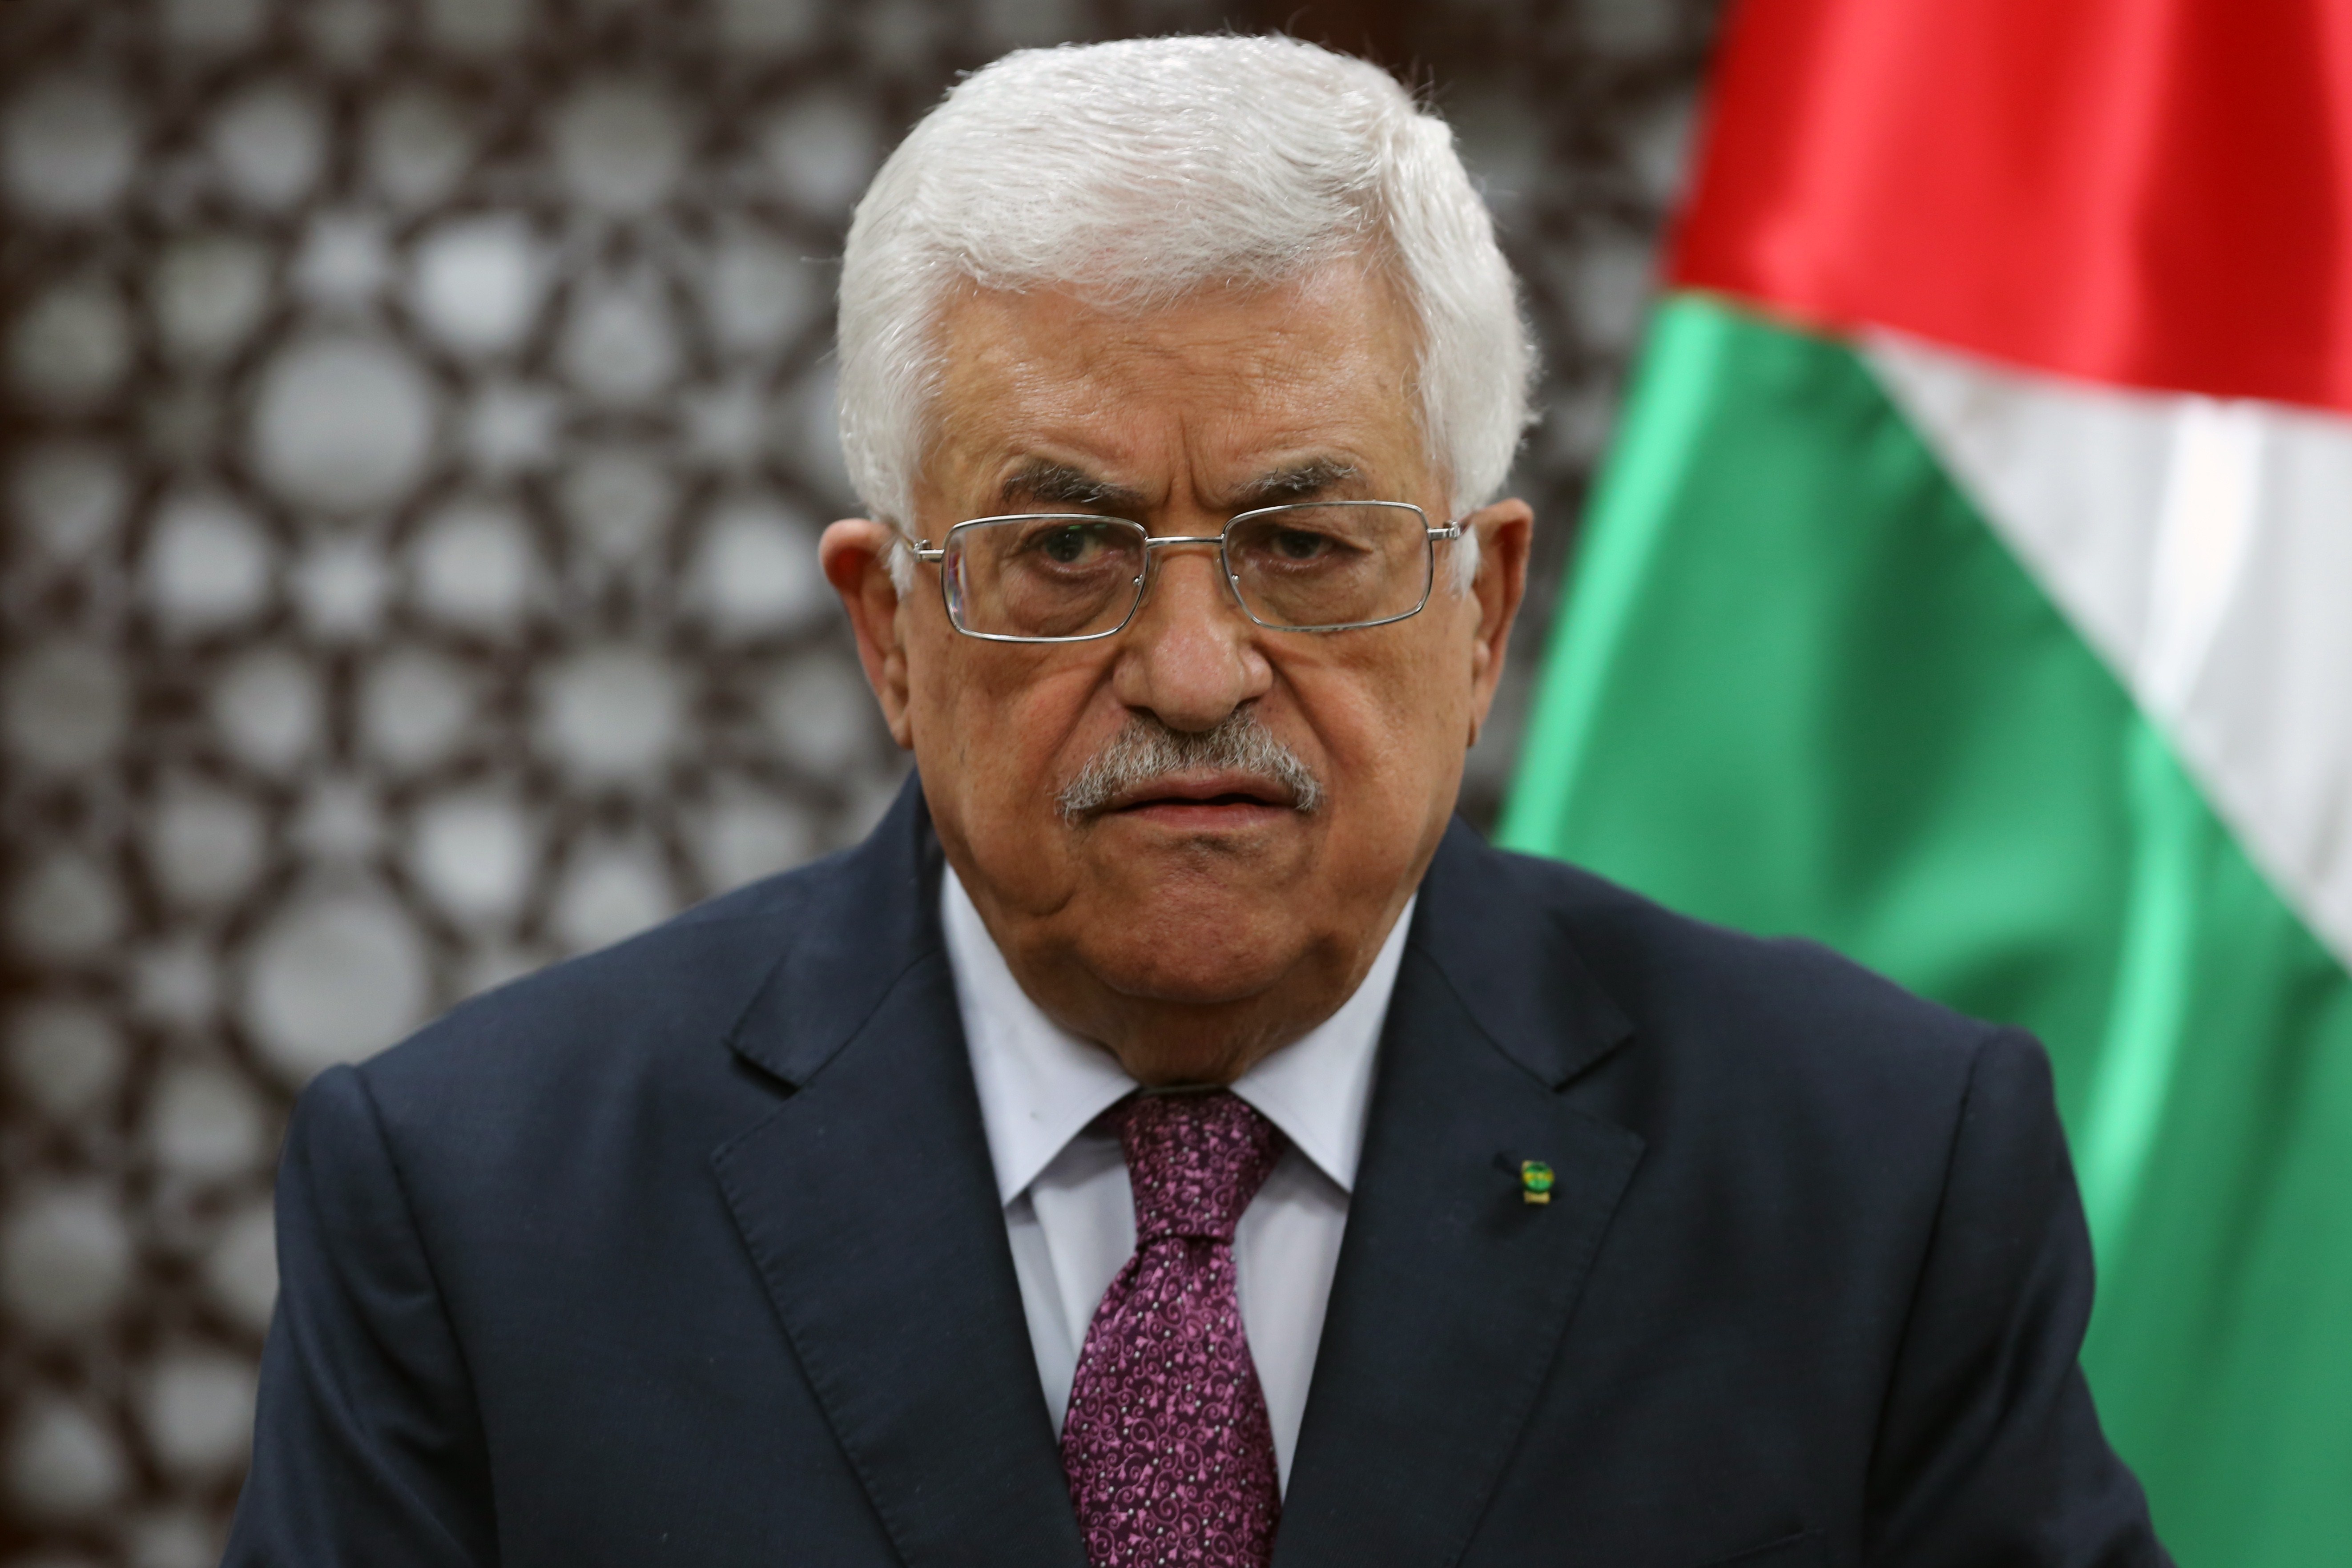 Palestinian president Mahmud Abbas speaks during a press conference on October 8, 2014 in the West Bank City of Ramallah. Clashes broke out as Palestinians protested against Jews visiting the flashpoint holy site on the eve of the week-long holiday for Sukkot, or Feast of Tabernacles, Israeli police said. AFP PHOTO/ABBAS MOMANI (Photo credit should read ABBAS MOMANI/AFP/Getty Images)